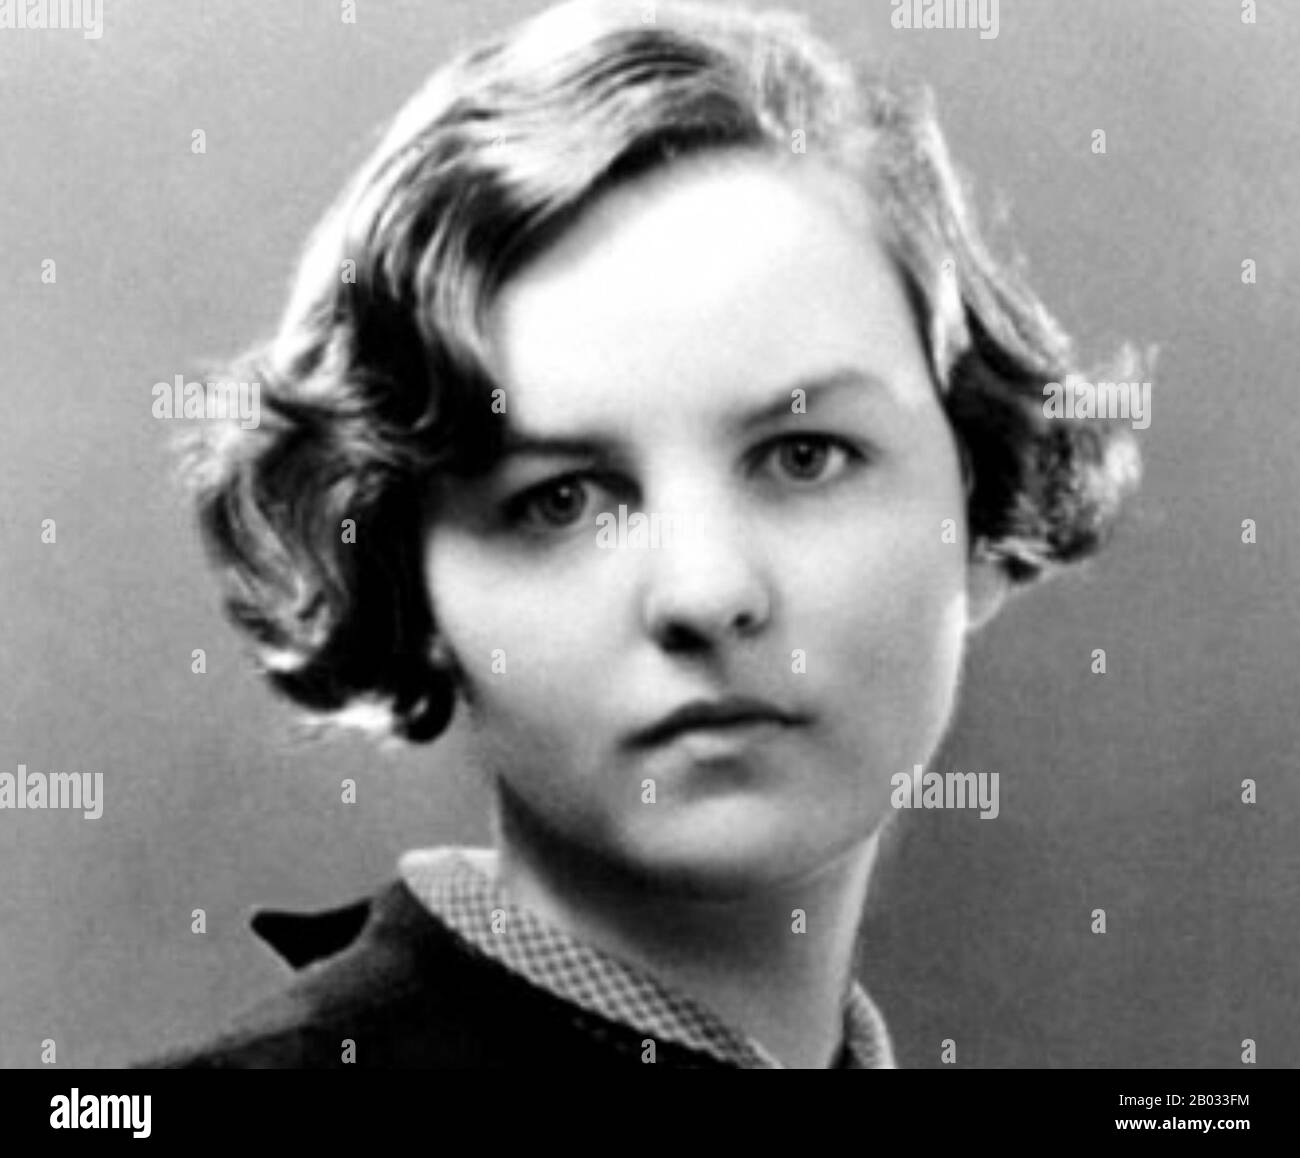 Jessica Lucy Freeman-Mitford (11 September 1917 – 22 July 1996) was an English author, journalist, civil rights activist and political campaigner, and was one of the Mitford sisters. She became an American citizen in 1944. Stock Photo